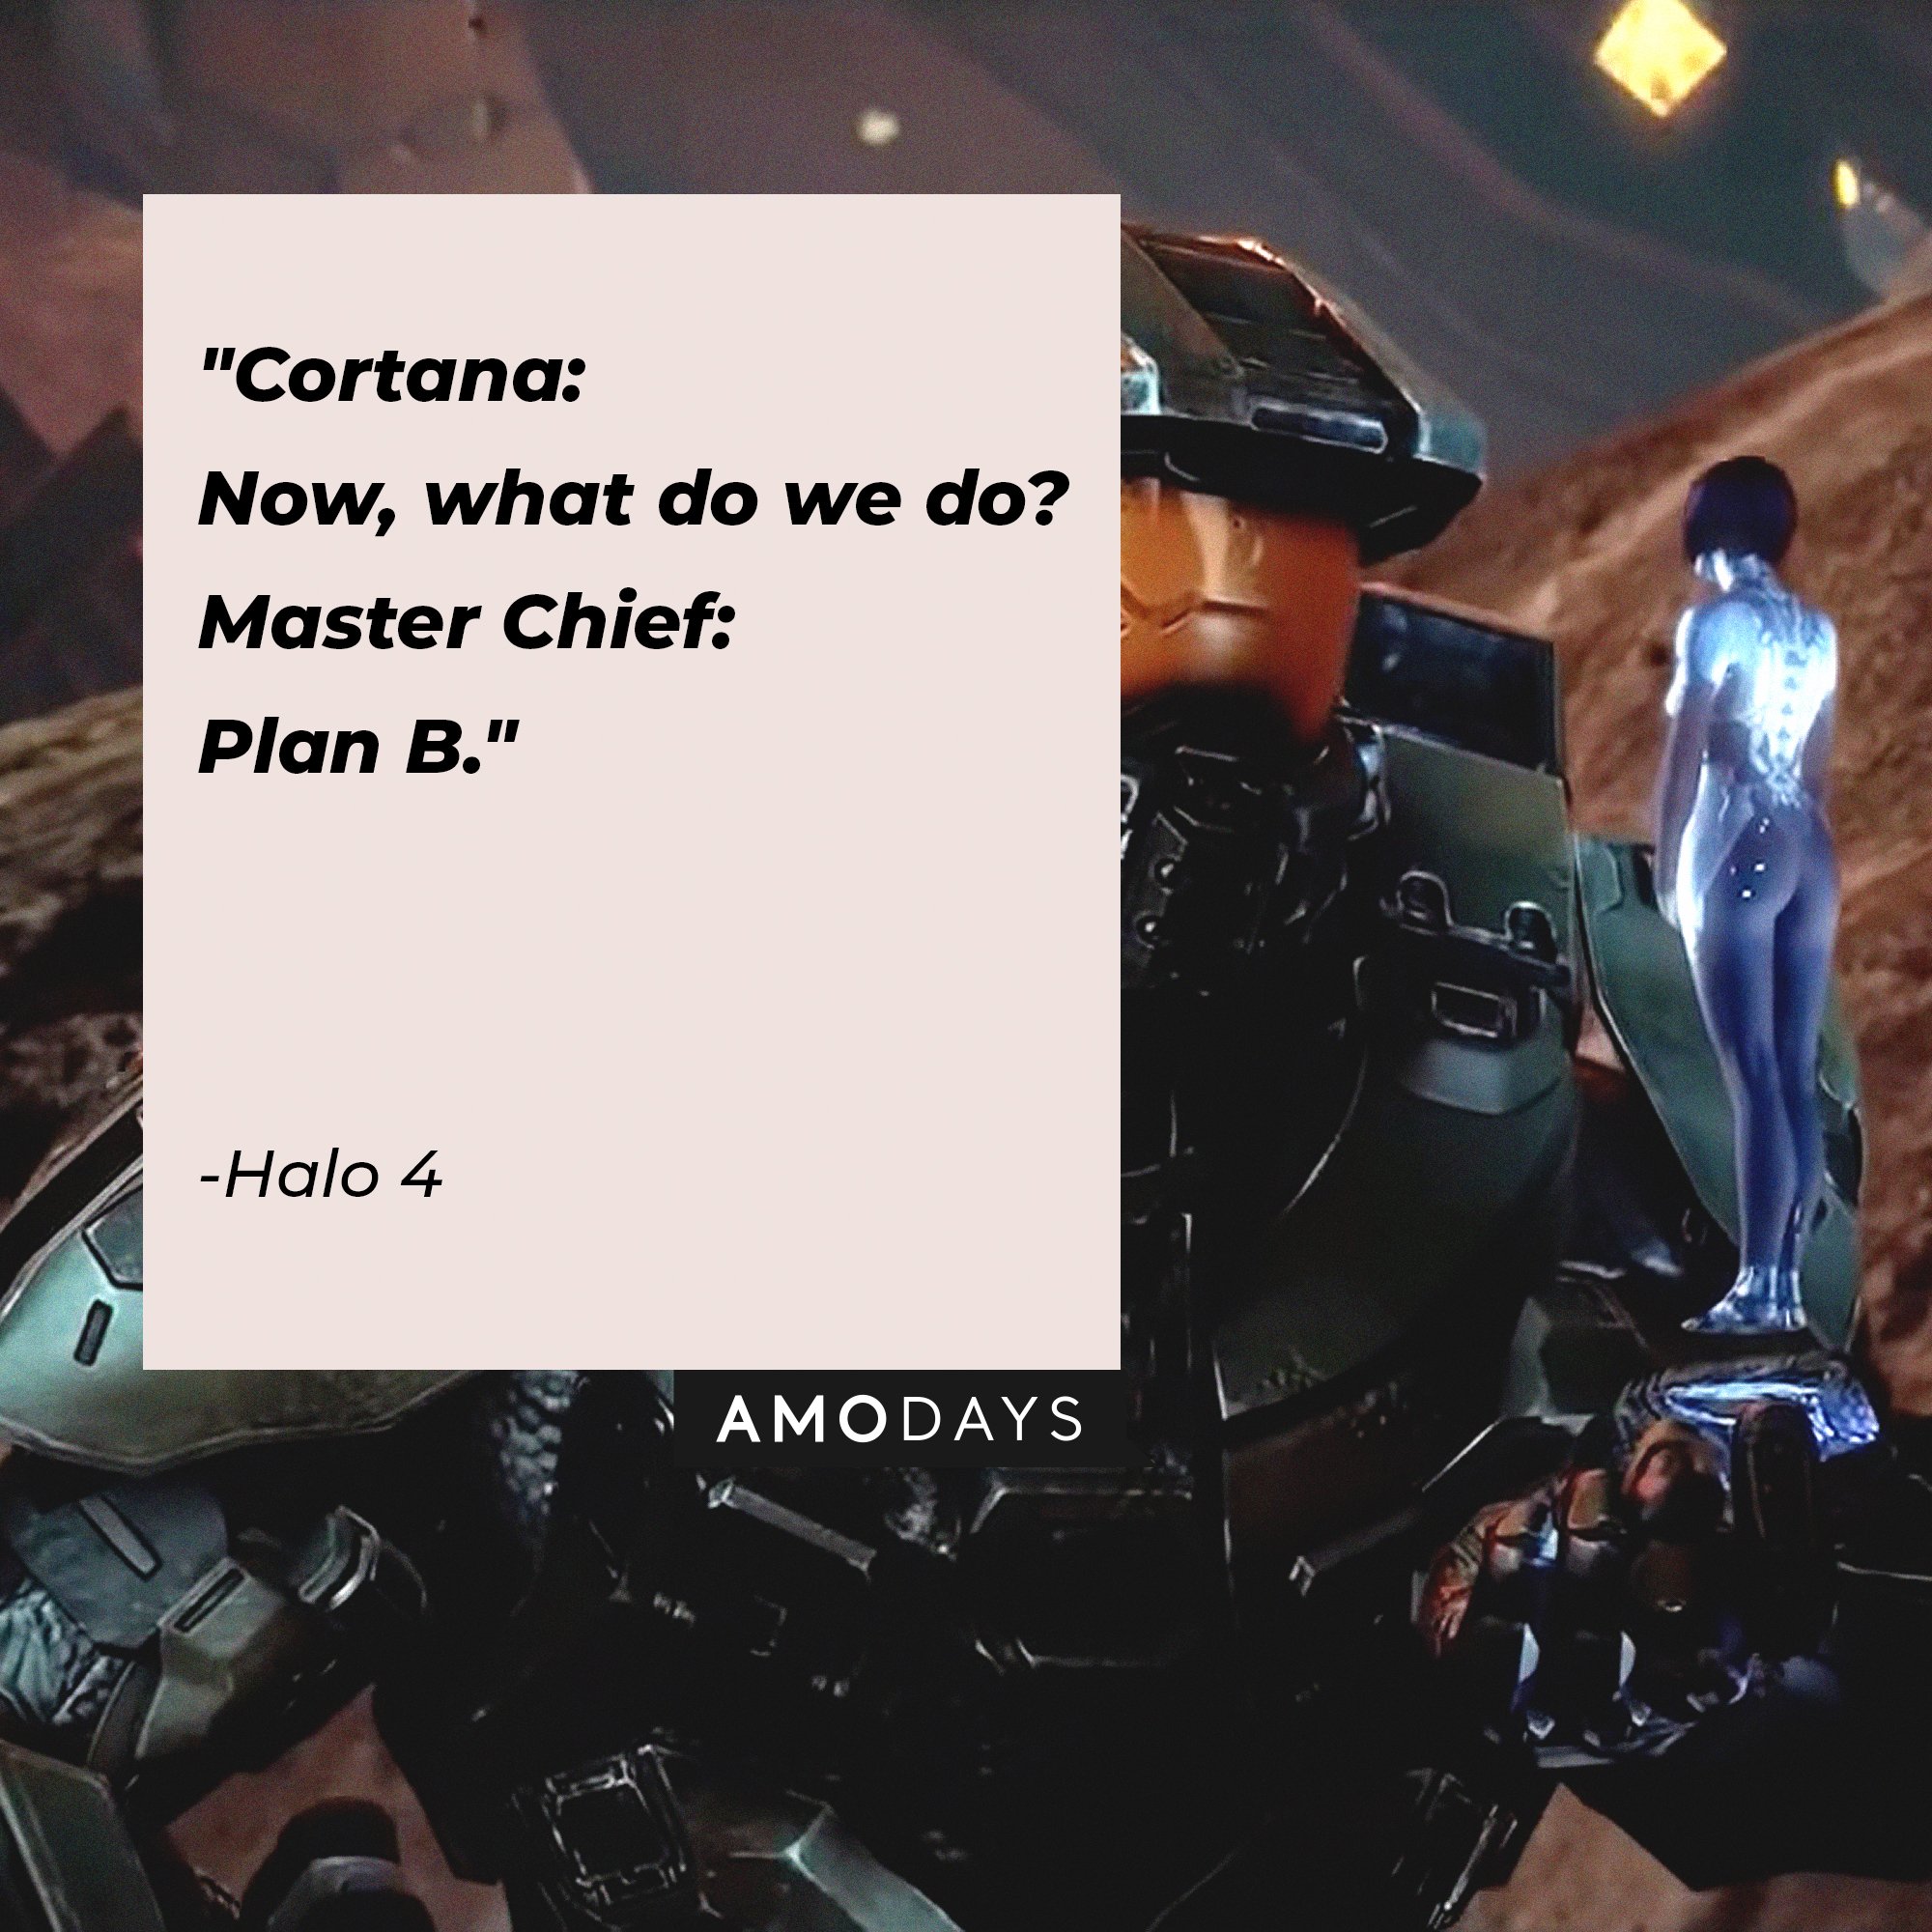 "Halo 4" quotes: "Cortana: Now what do we do? / Master Chief: Plan B." | Image: AmoDays